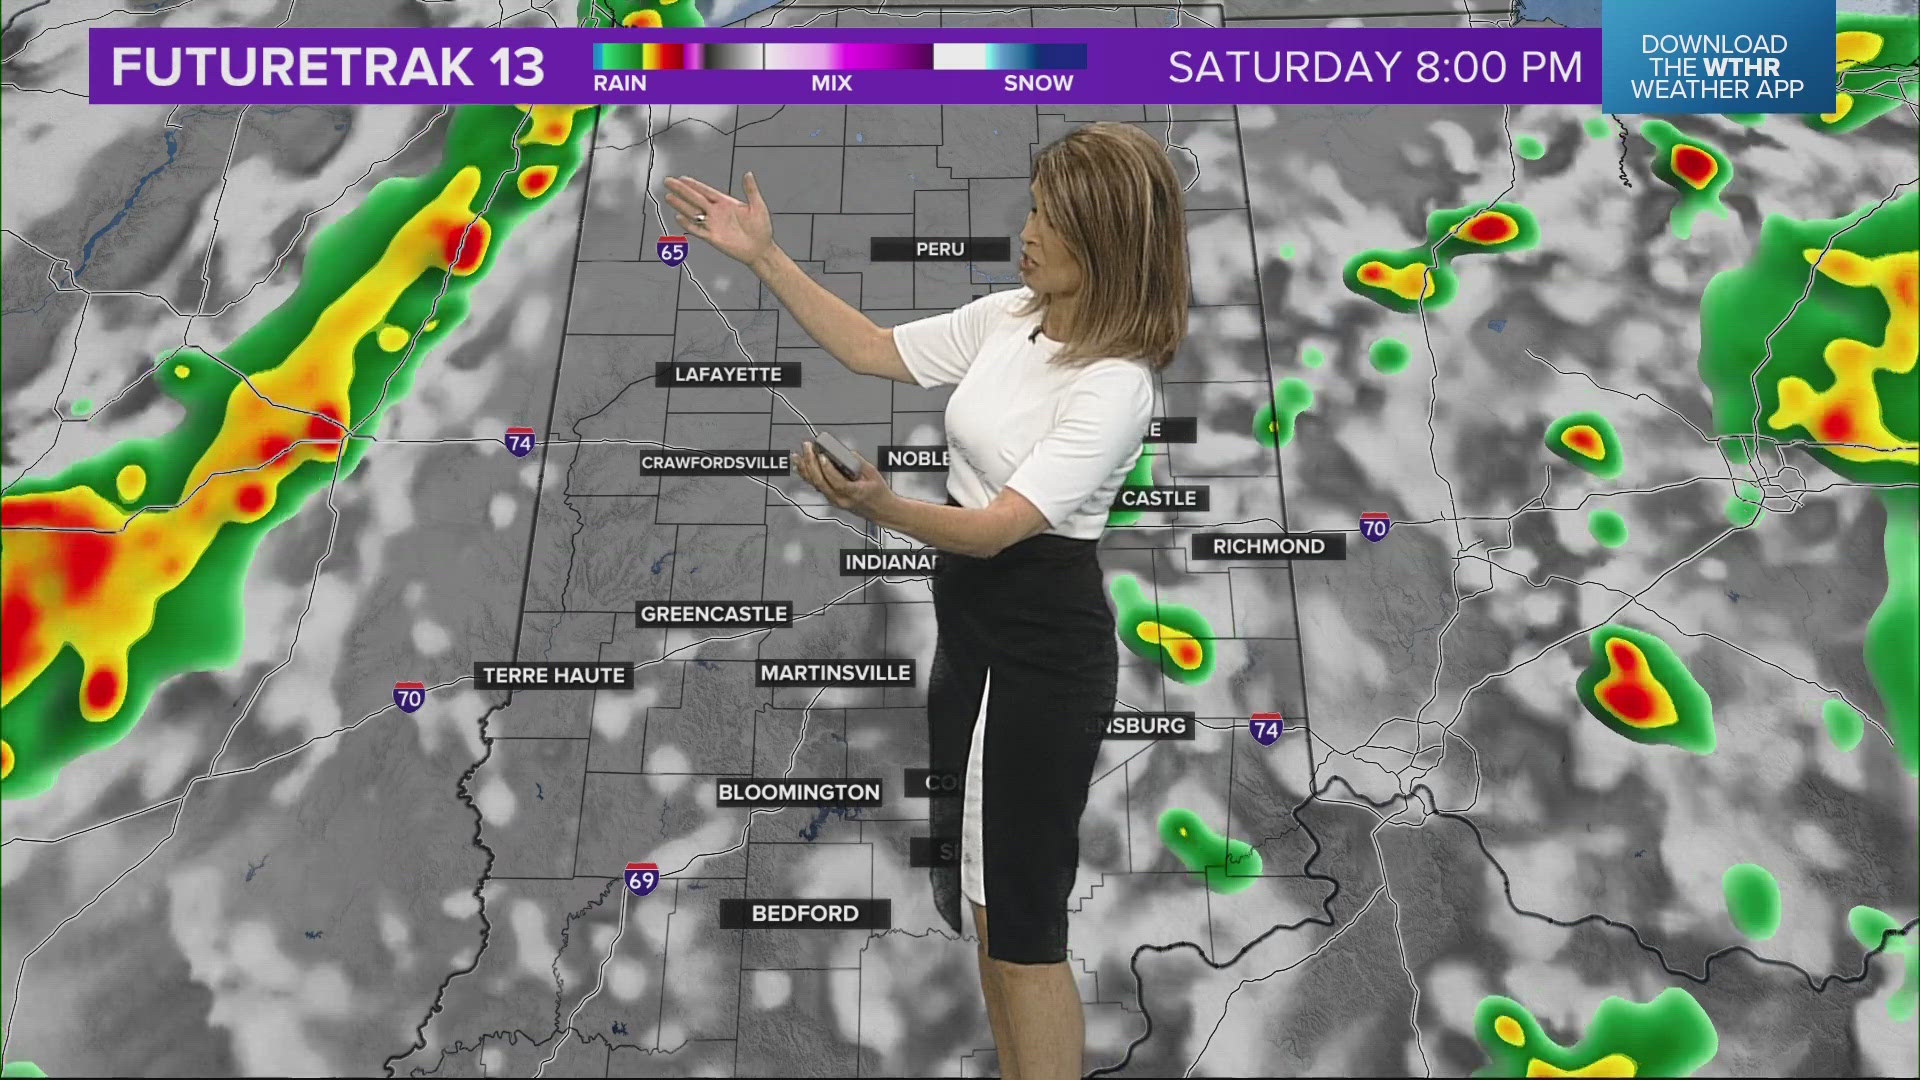 13News meteorologist Angela Buchman breaks down a warm but muggy Friday in central Indiana and previews the weather for the 500 Festival Mini Marathon.